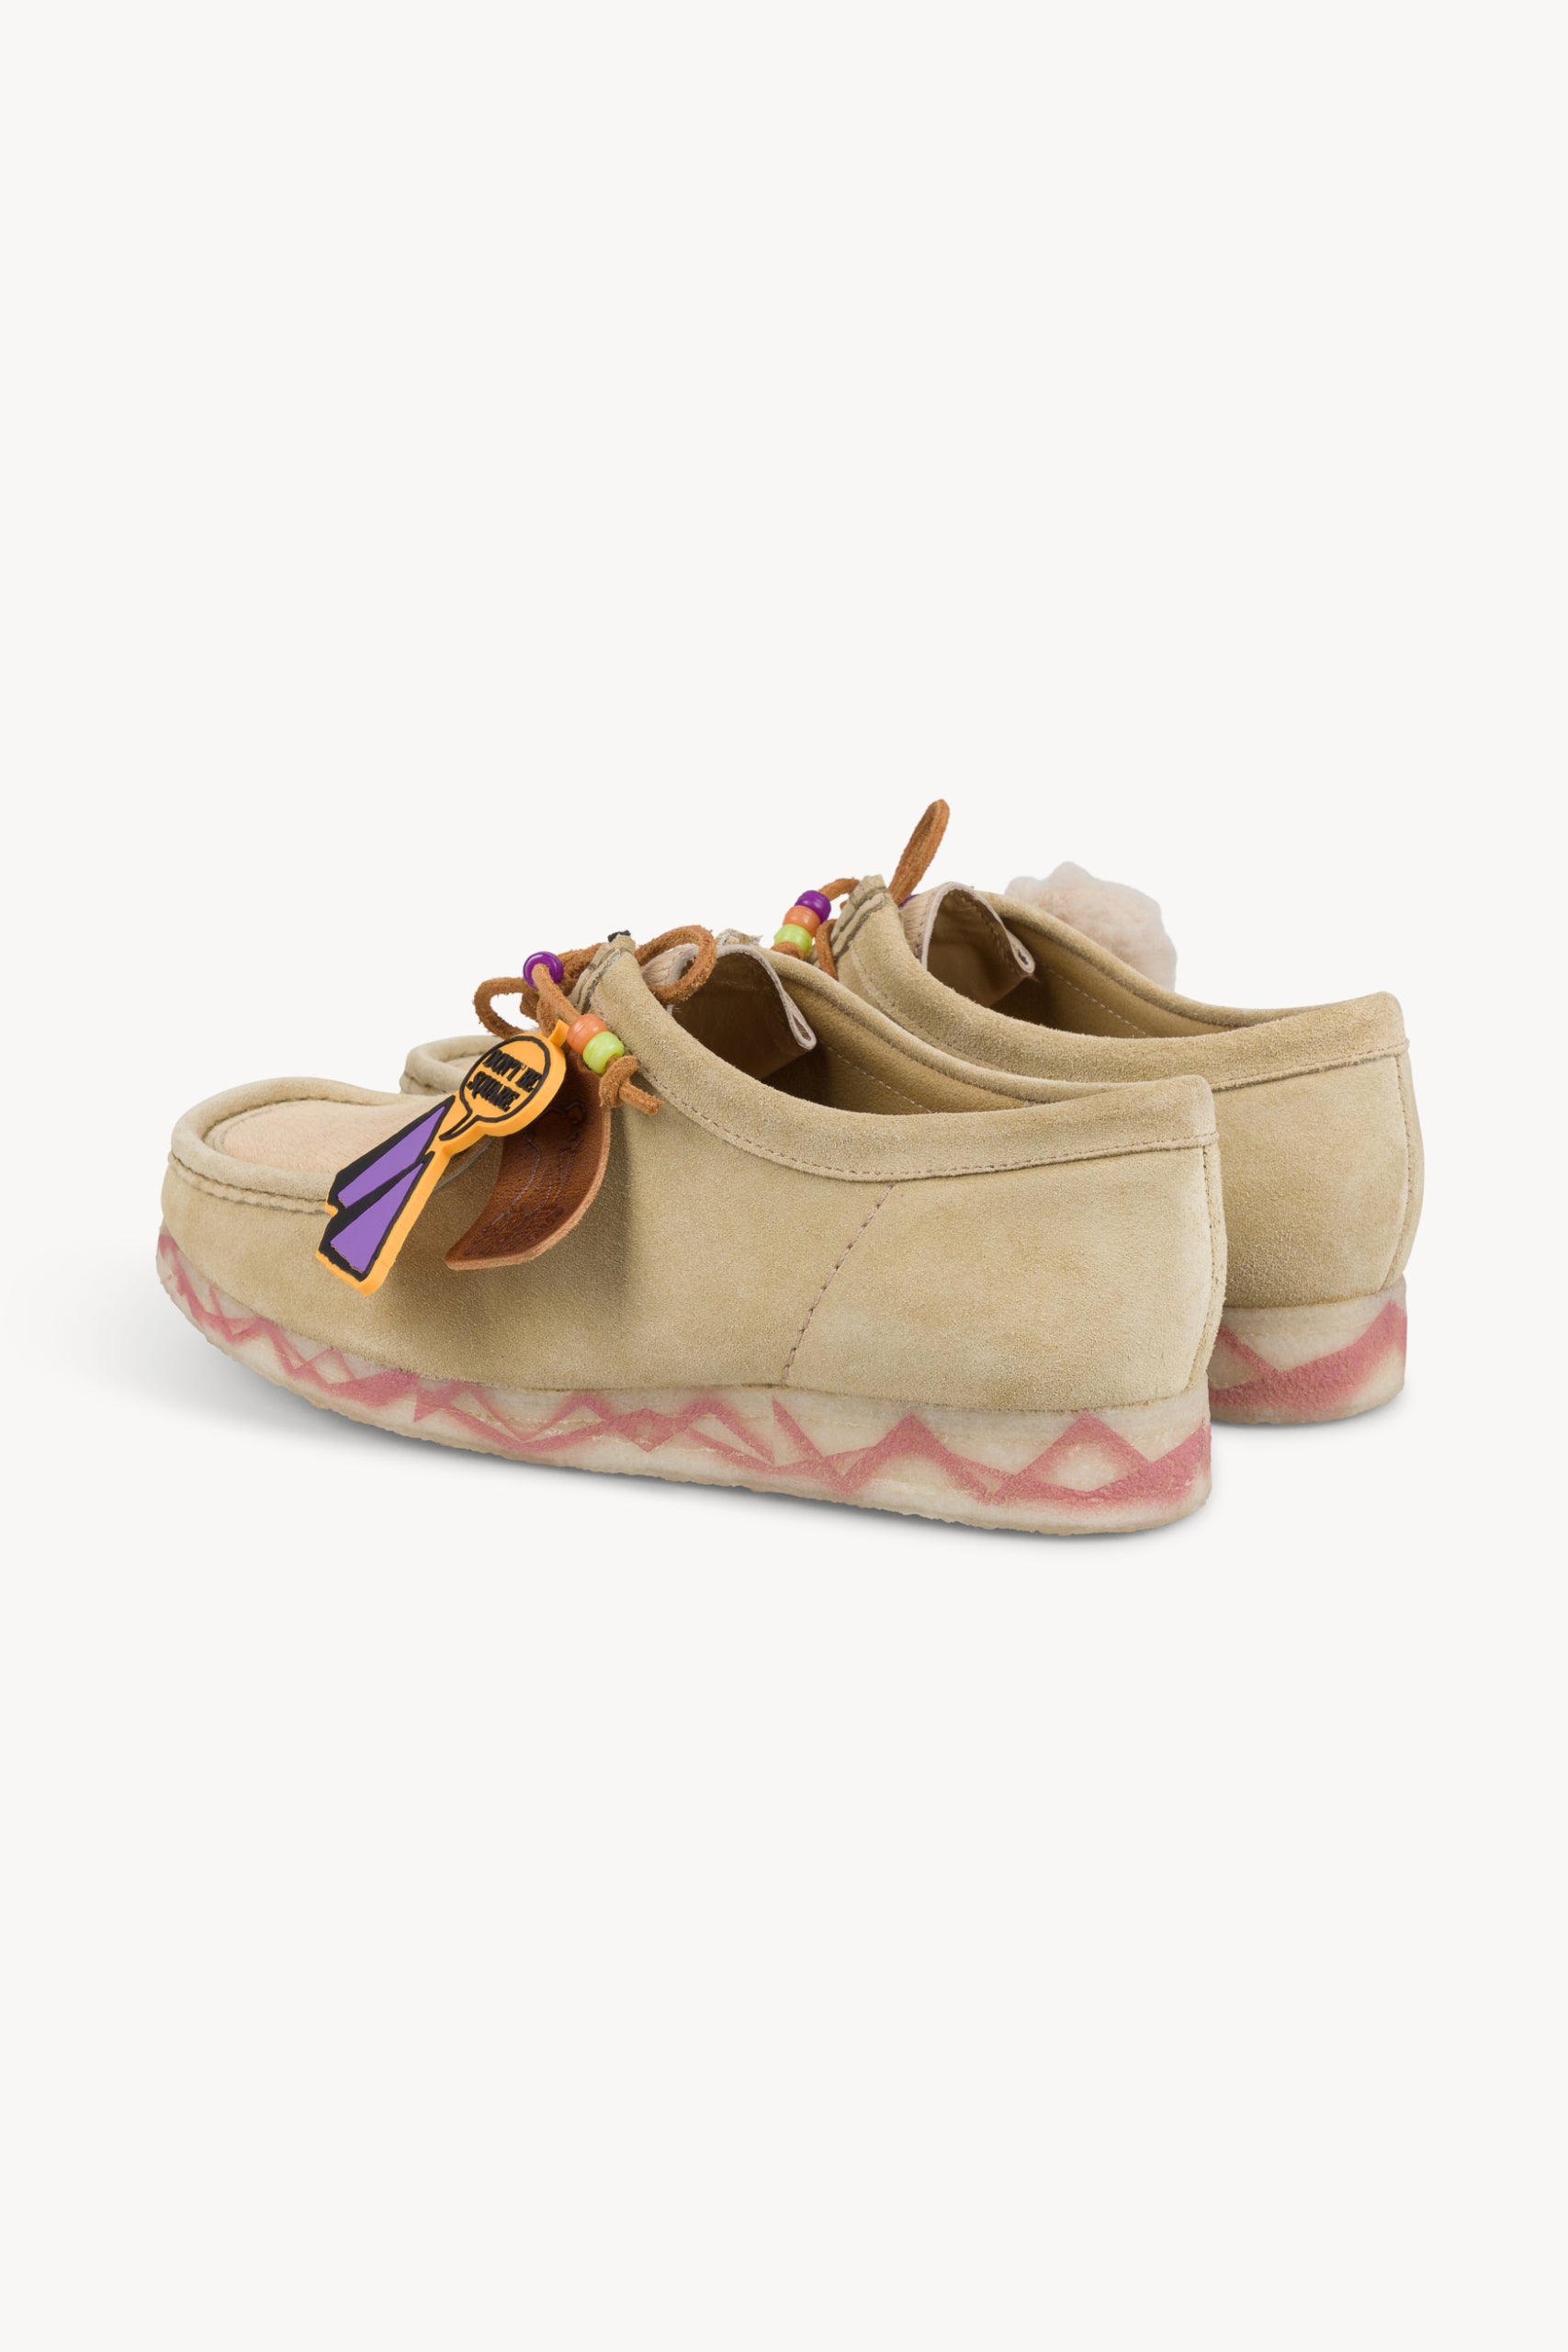 Load image into Gallery viewer, Aries x Clarks Originals - Wallabee